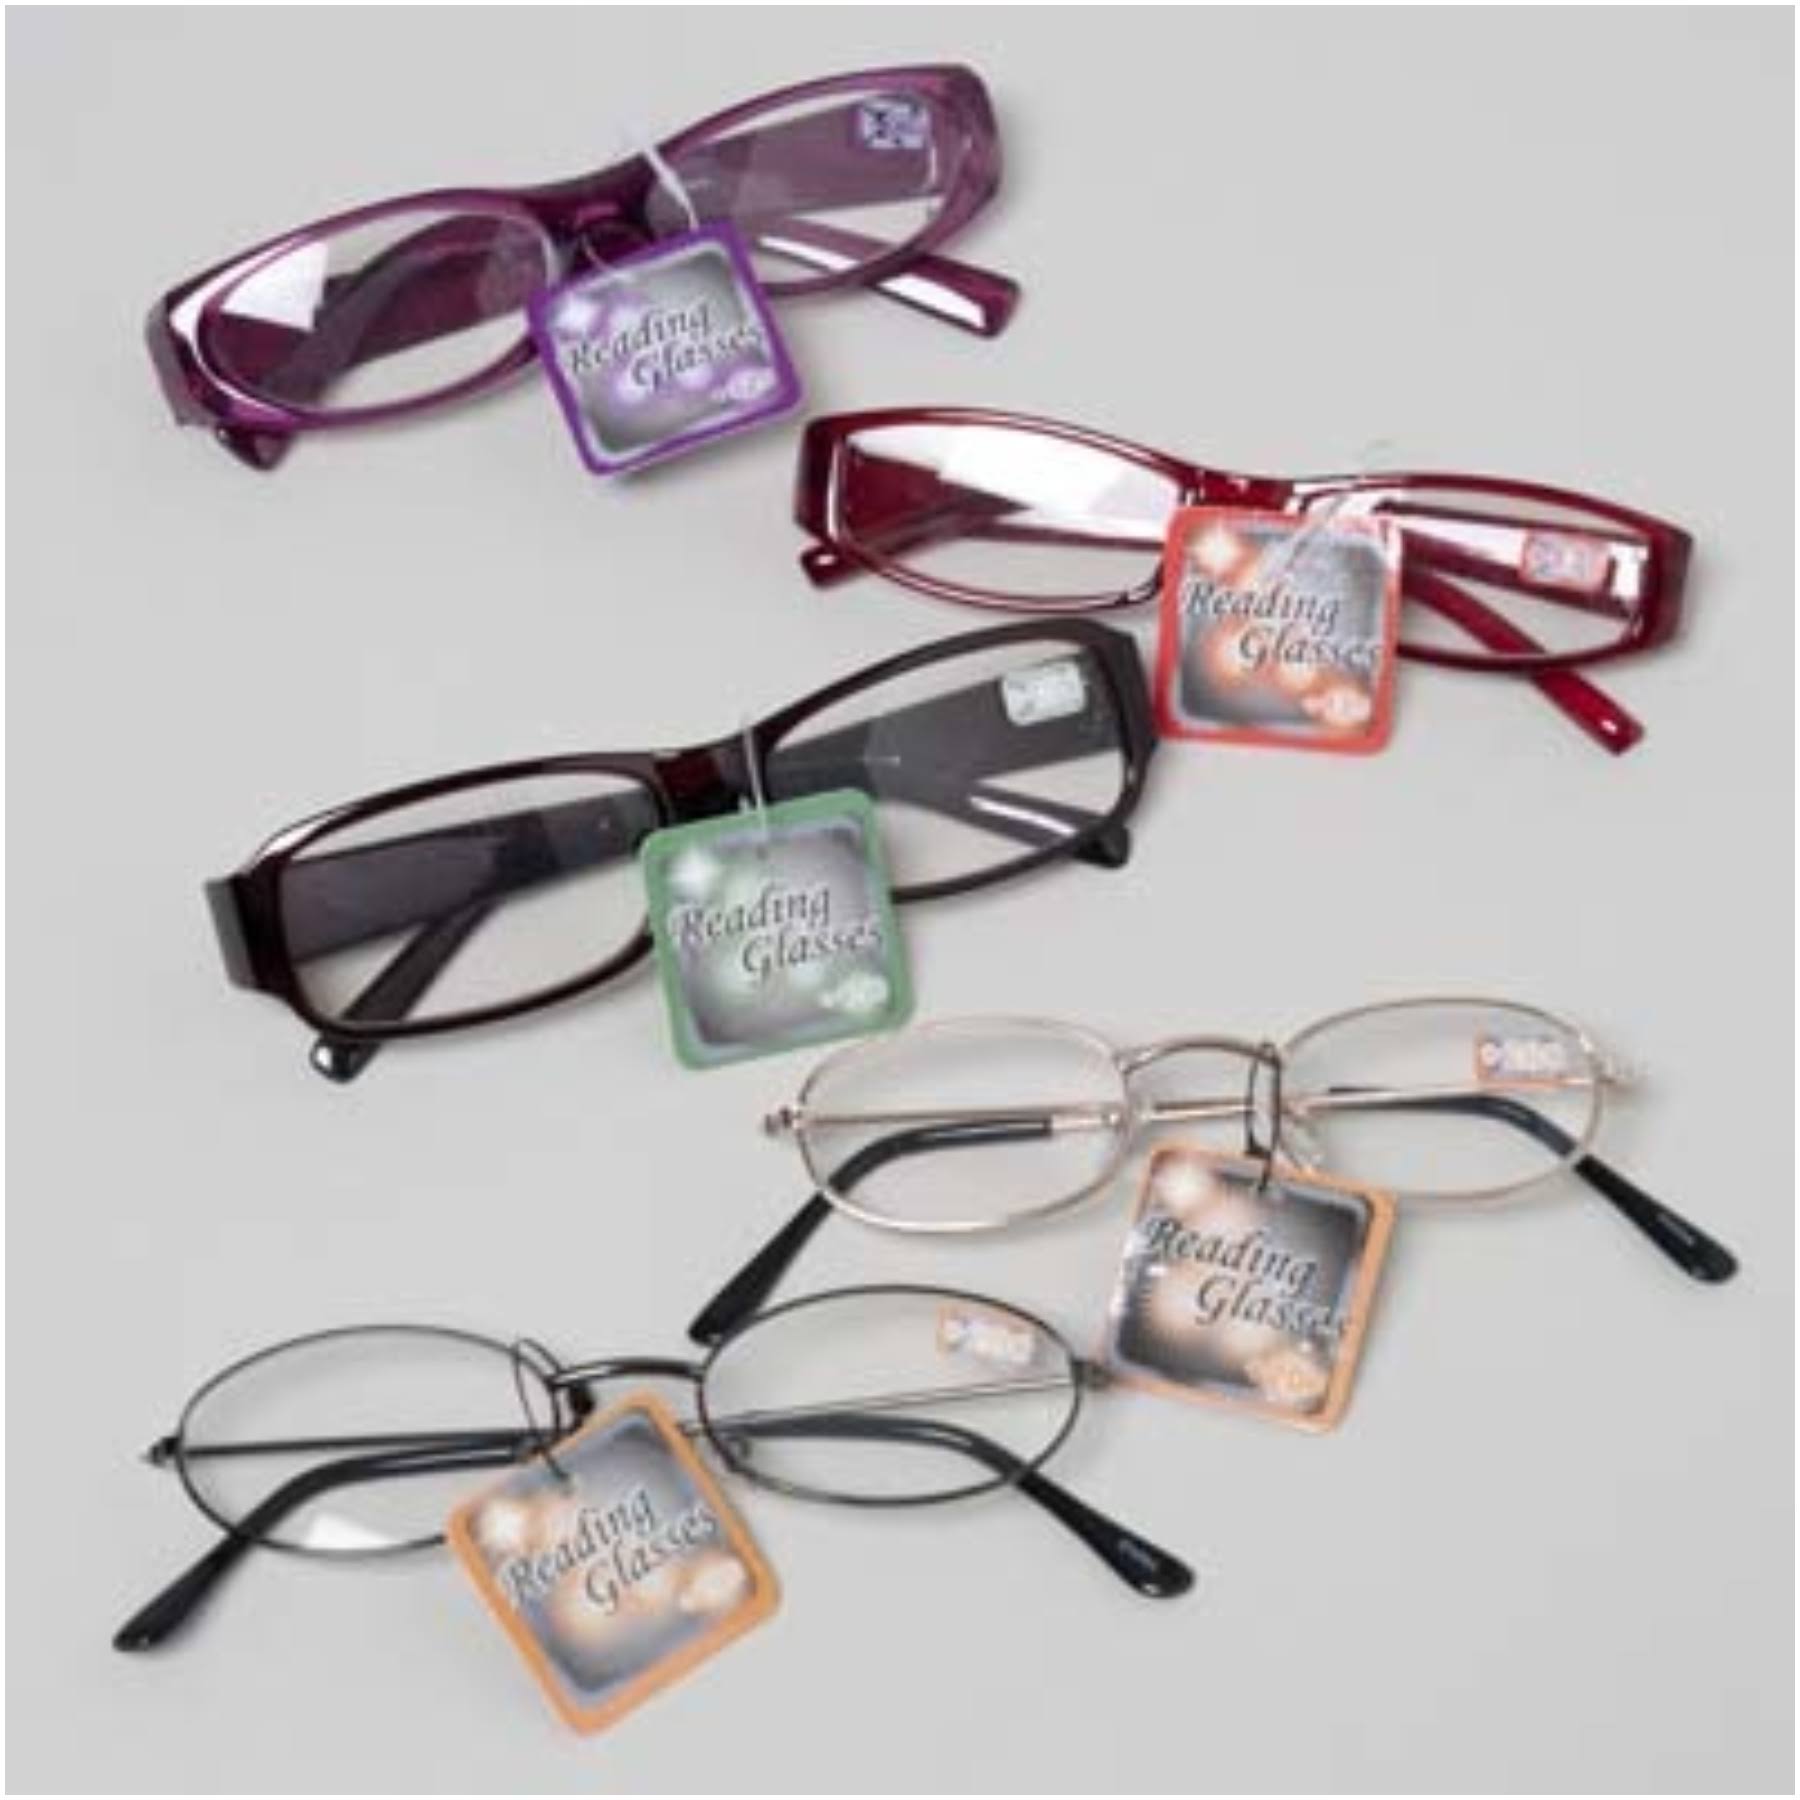 DDI 1335698 Assorted Reading Glasses 240 Piece Floor Display -Pack of 240